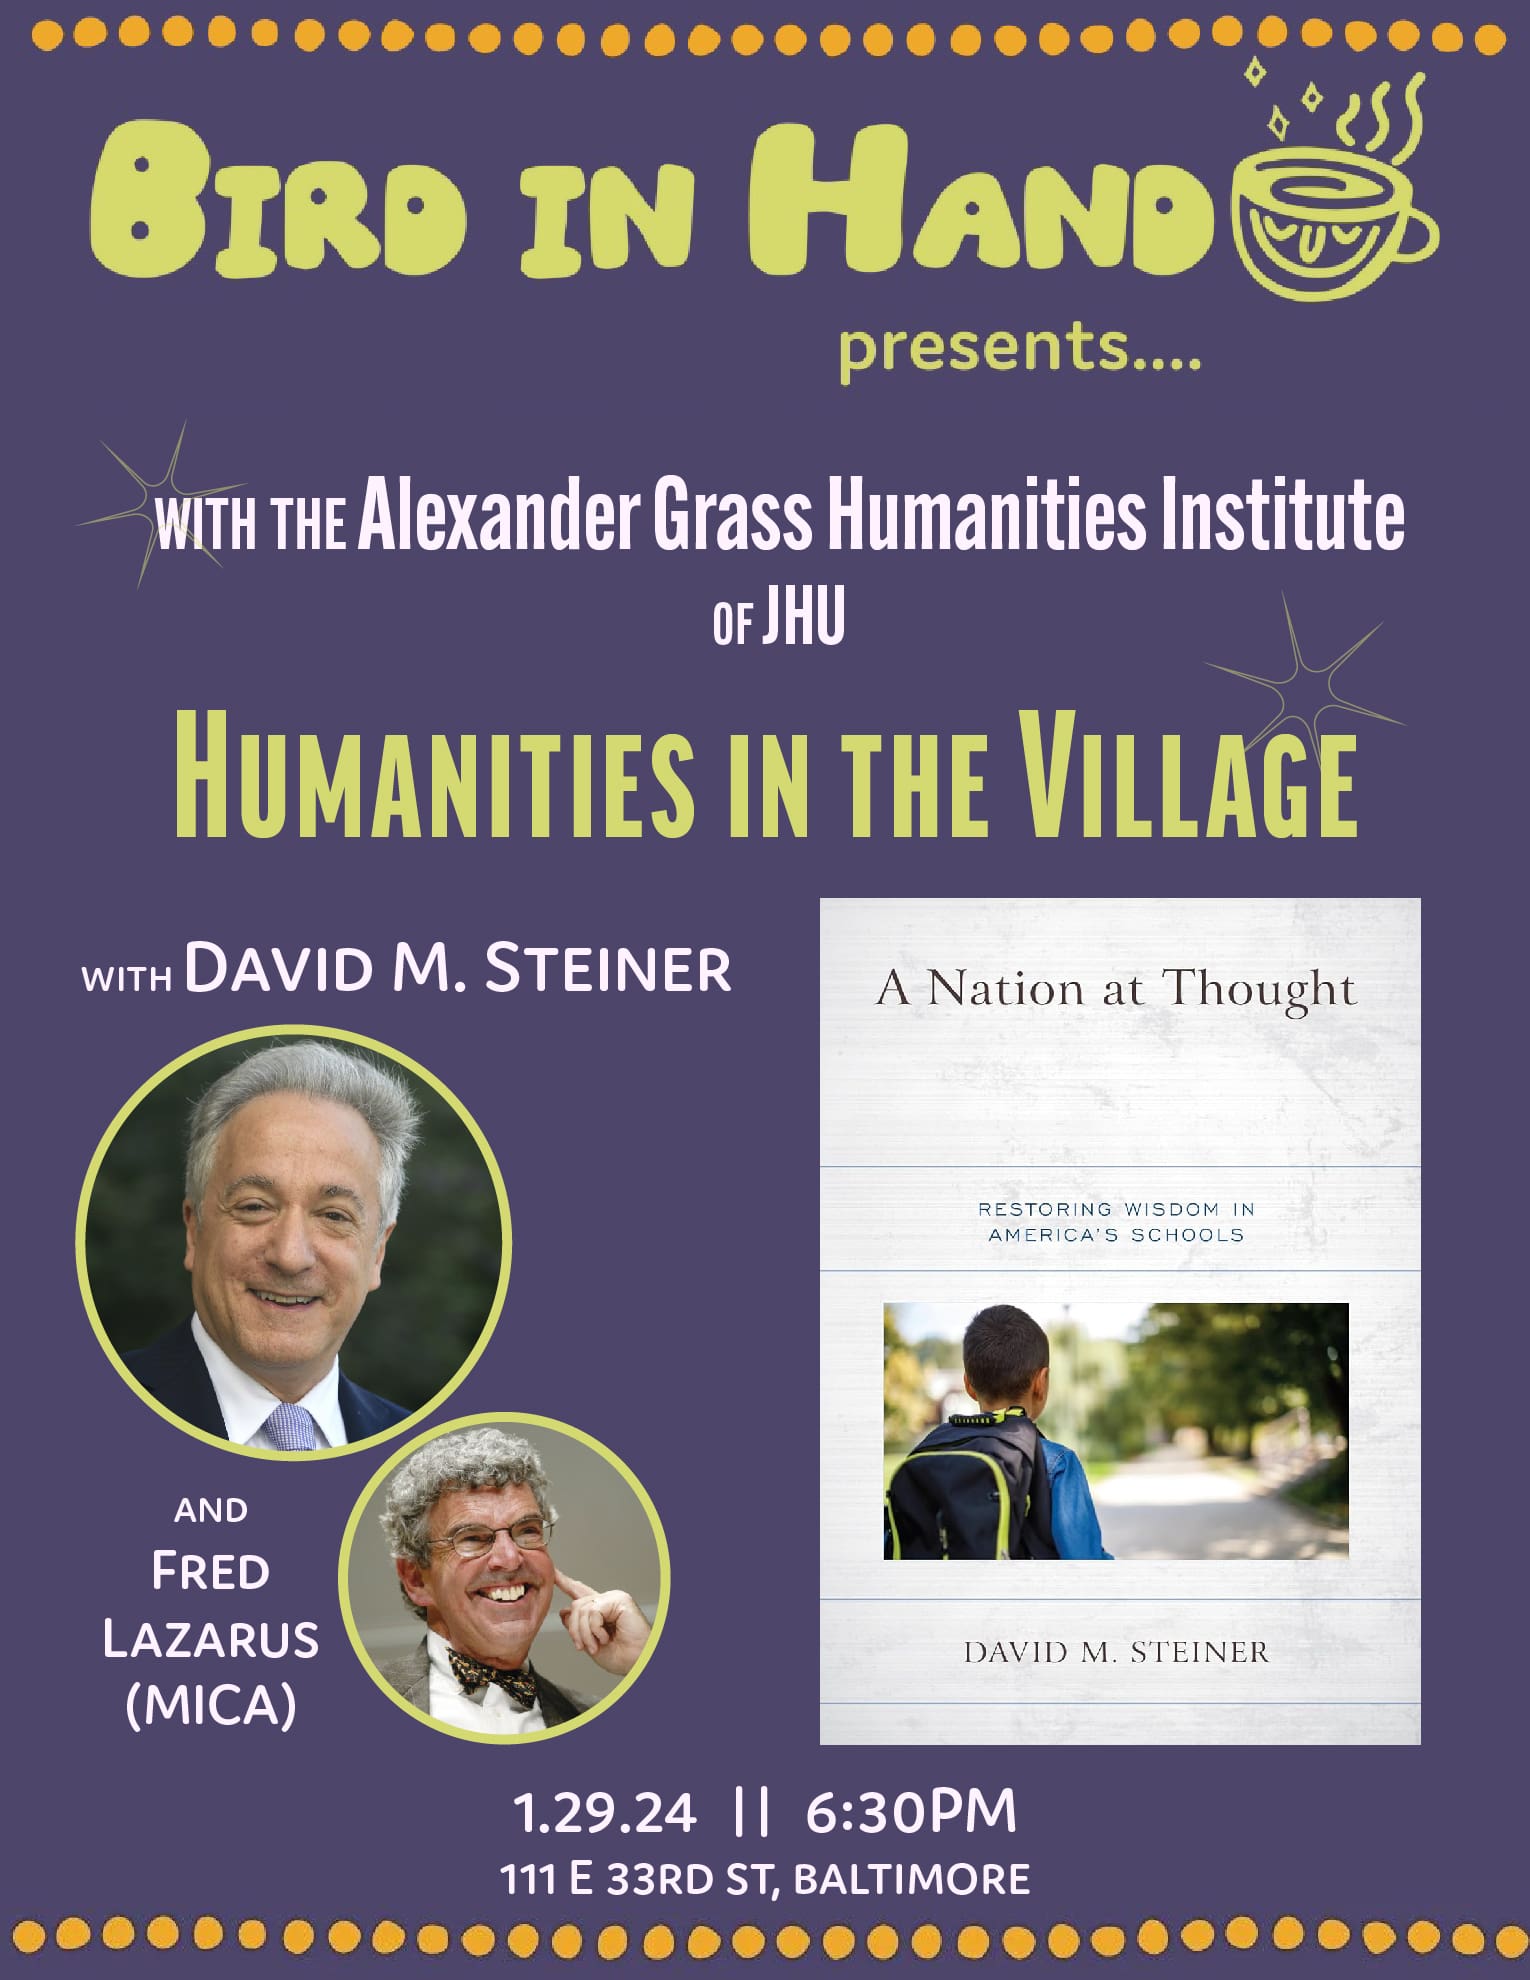 Humanities in the Village flyer for David Steiner's book, "A Nation at Thought," with Fred Lazarus, on Jan. 29th.